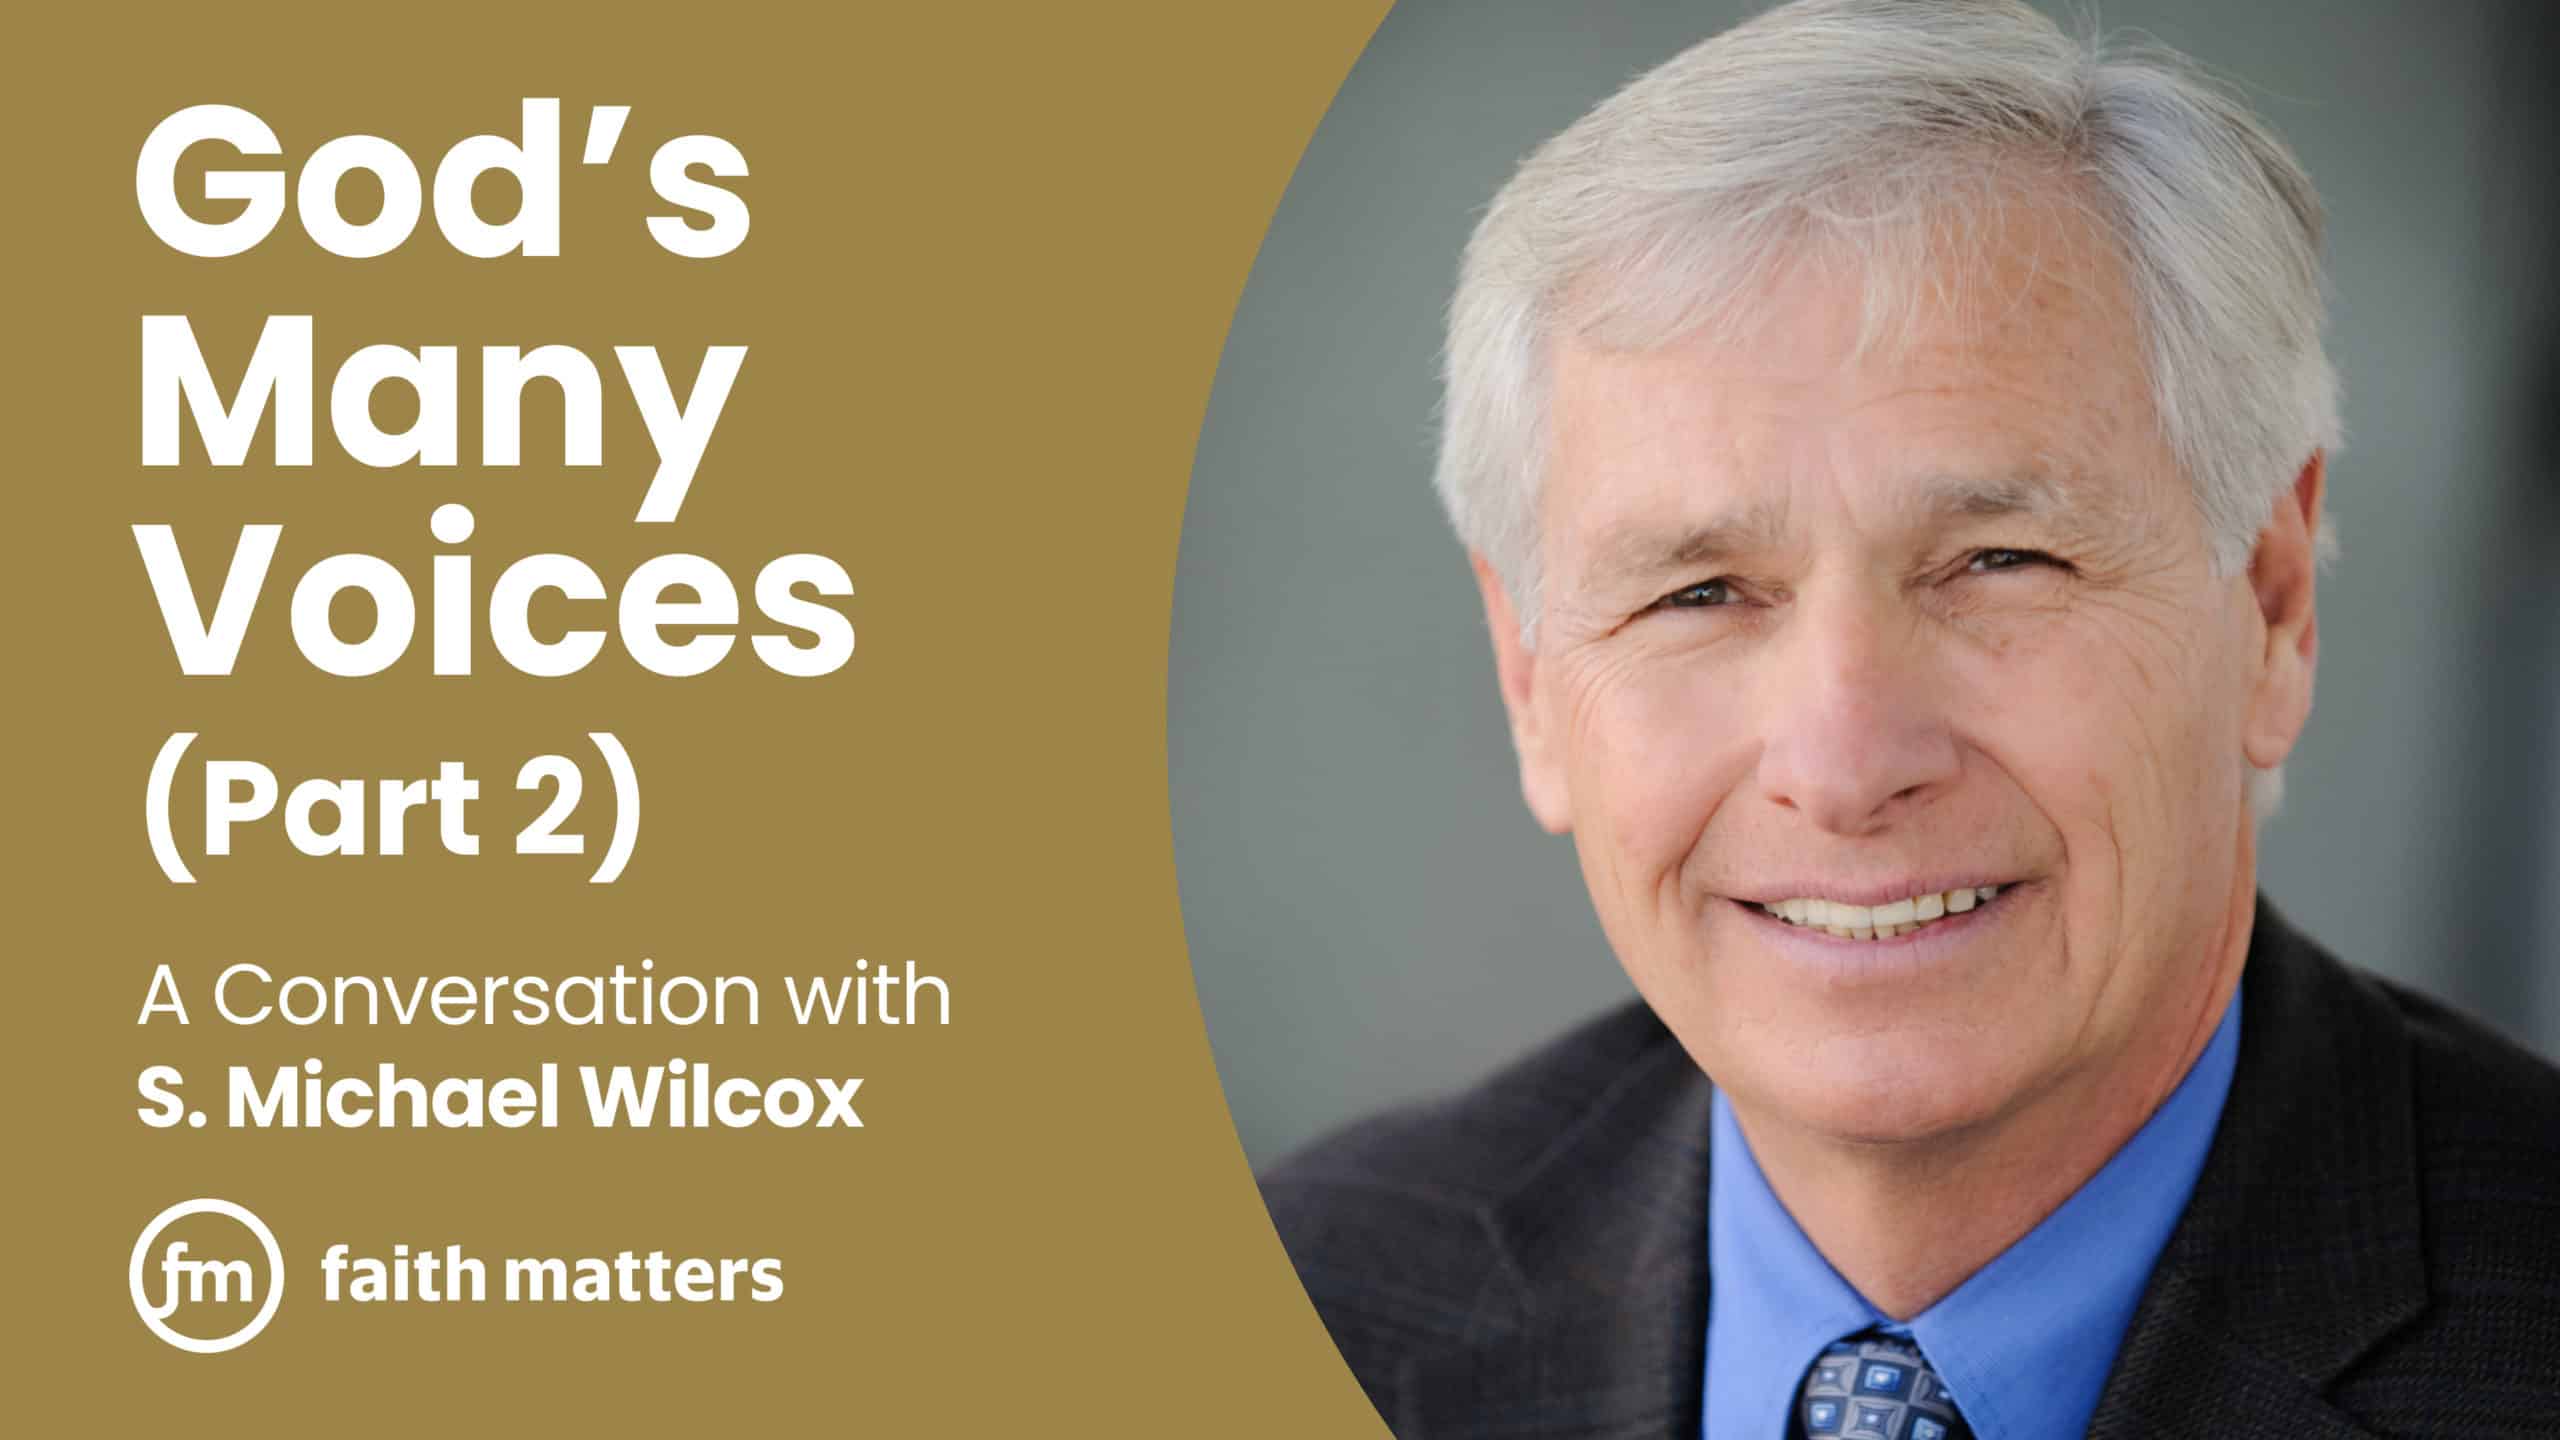 God's Many Voices (Pt. 2) — A Conversation with Michael Wilcox